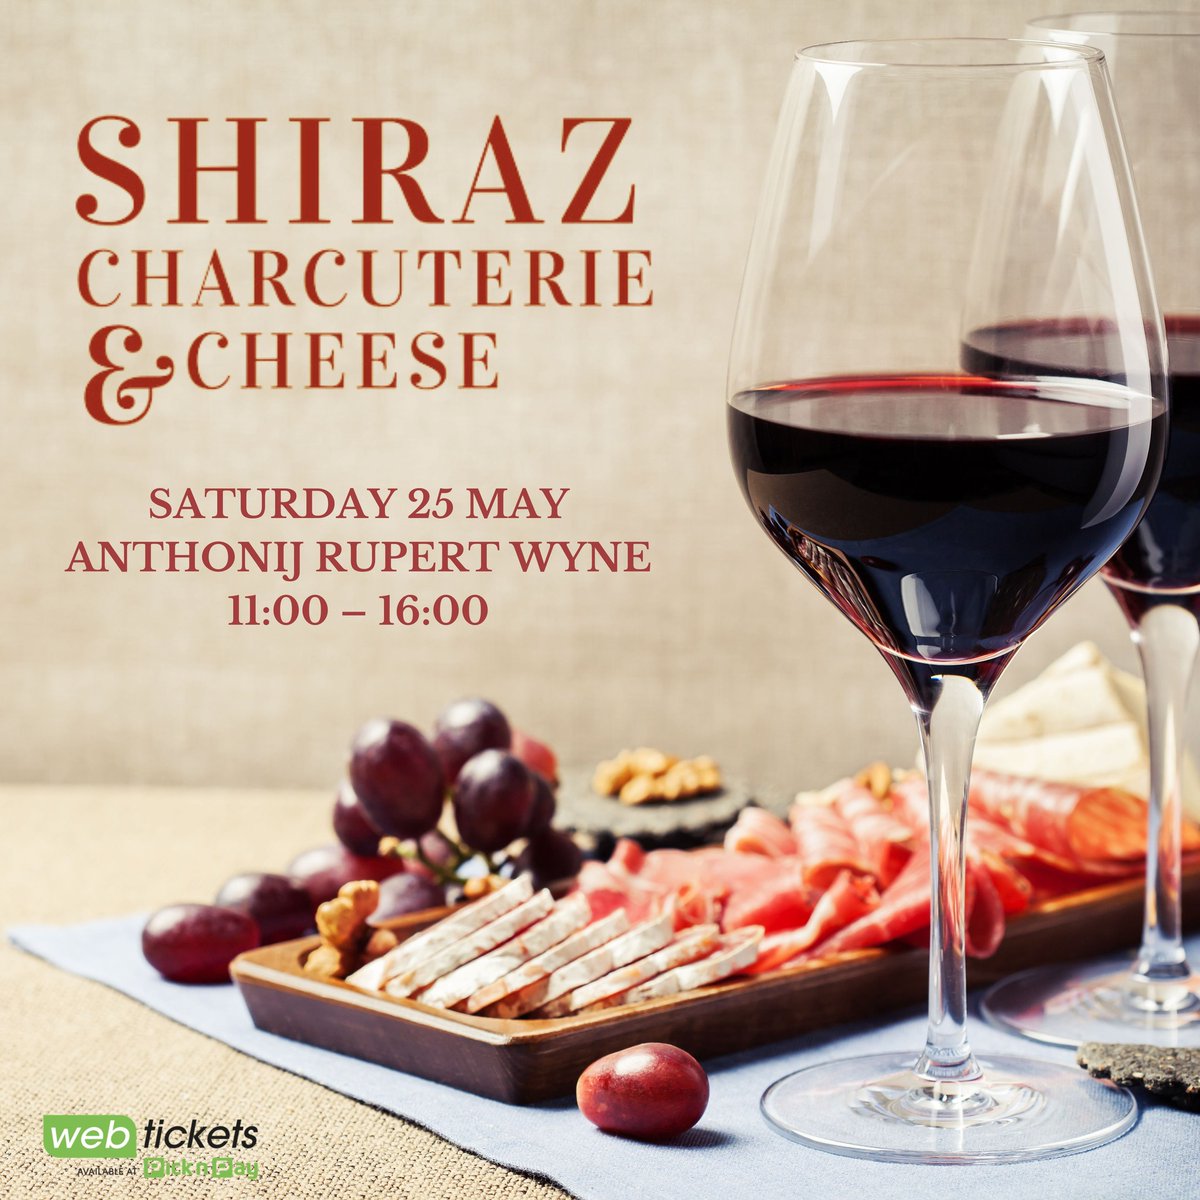 SHIRAZ, CHARCUTERIE AND CHEESE AT ANTHONIJ RUPERT WYNE
- Limited tickets @webticketsSA - tinyurl.com/4yb7sxcx
- Entry incl a glass & taste more than 30 wines.
- Charcuterie & Cheese for sale
- Tastings strictly 11:00 - 14:00
- Sales & Live music 2pm - 4pm
#ShirazSA #Wine